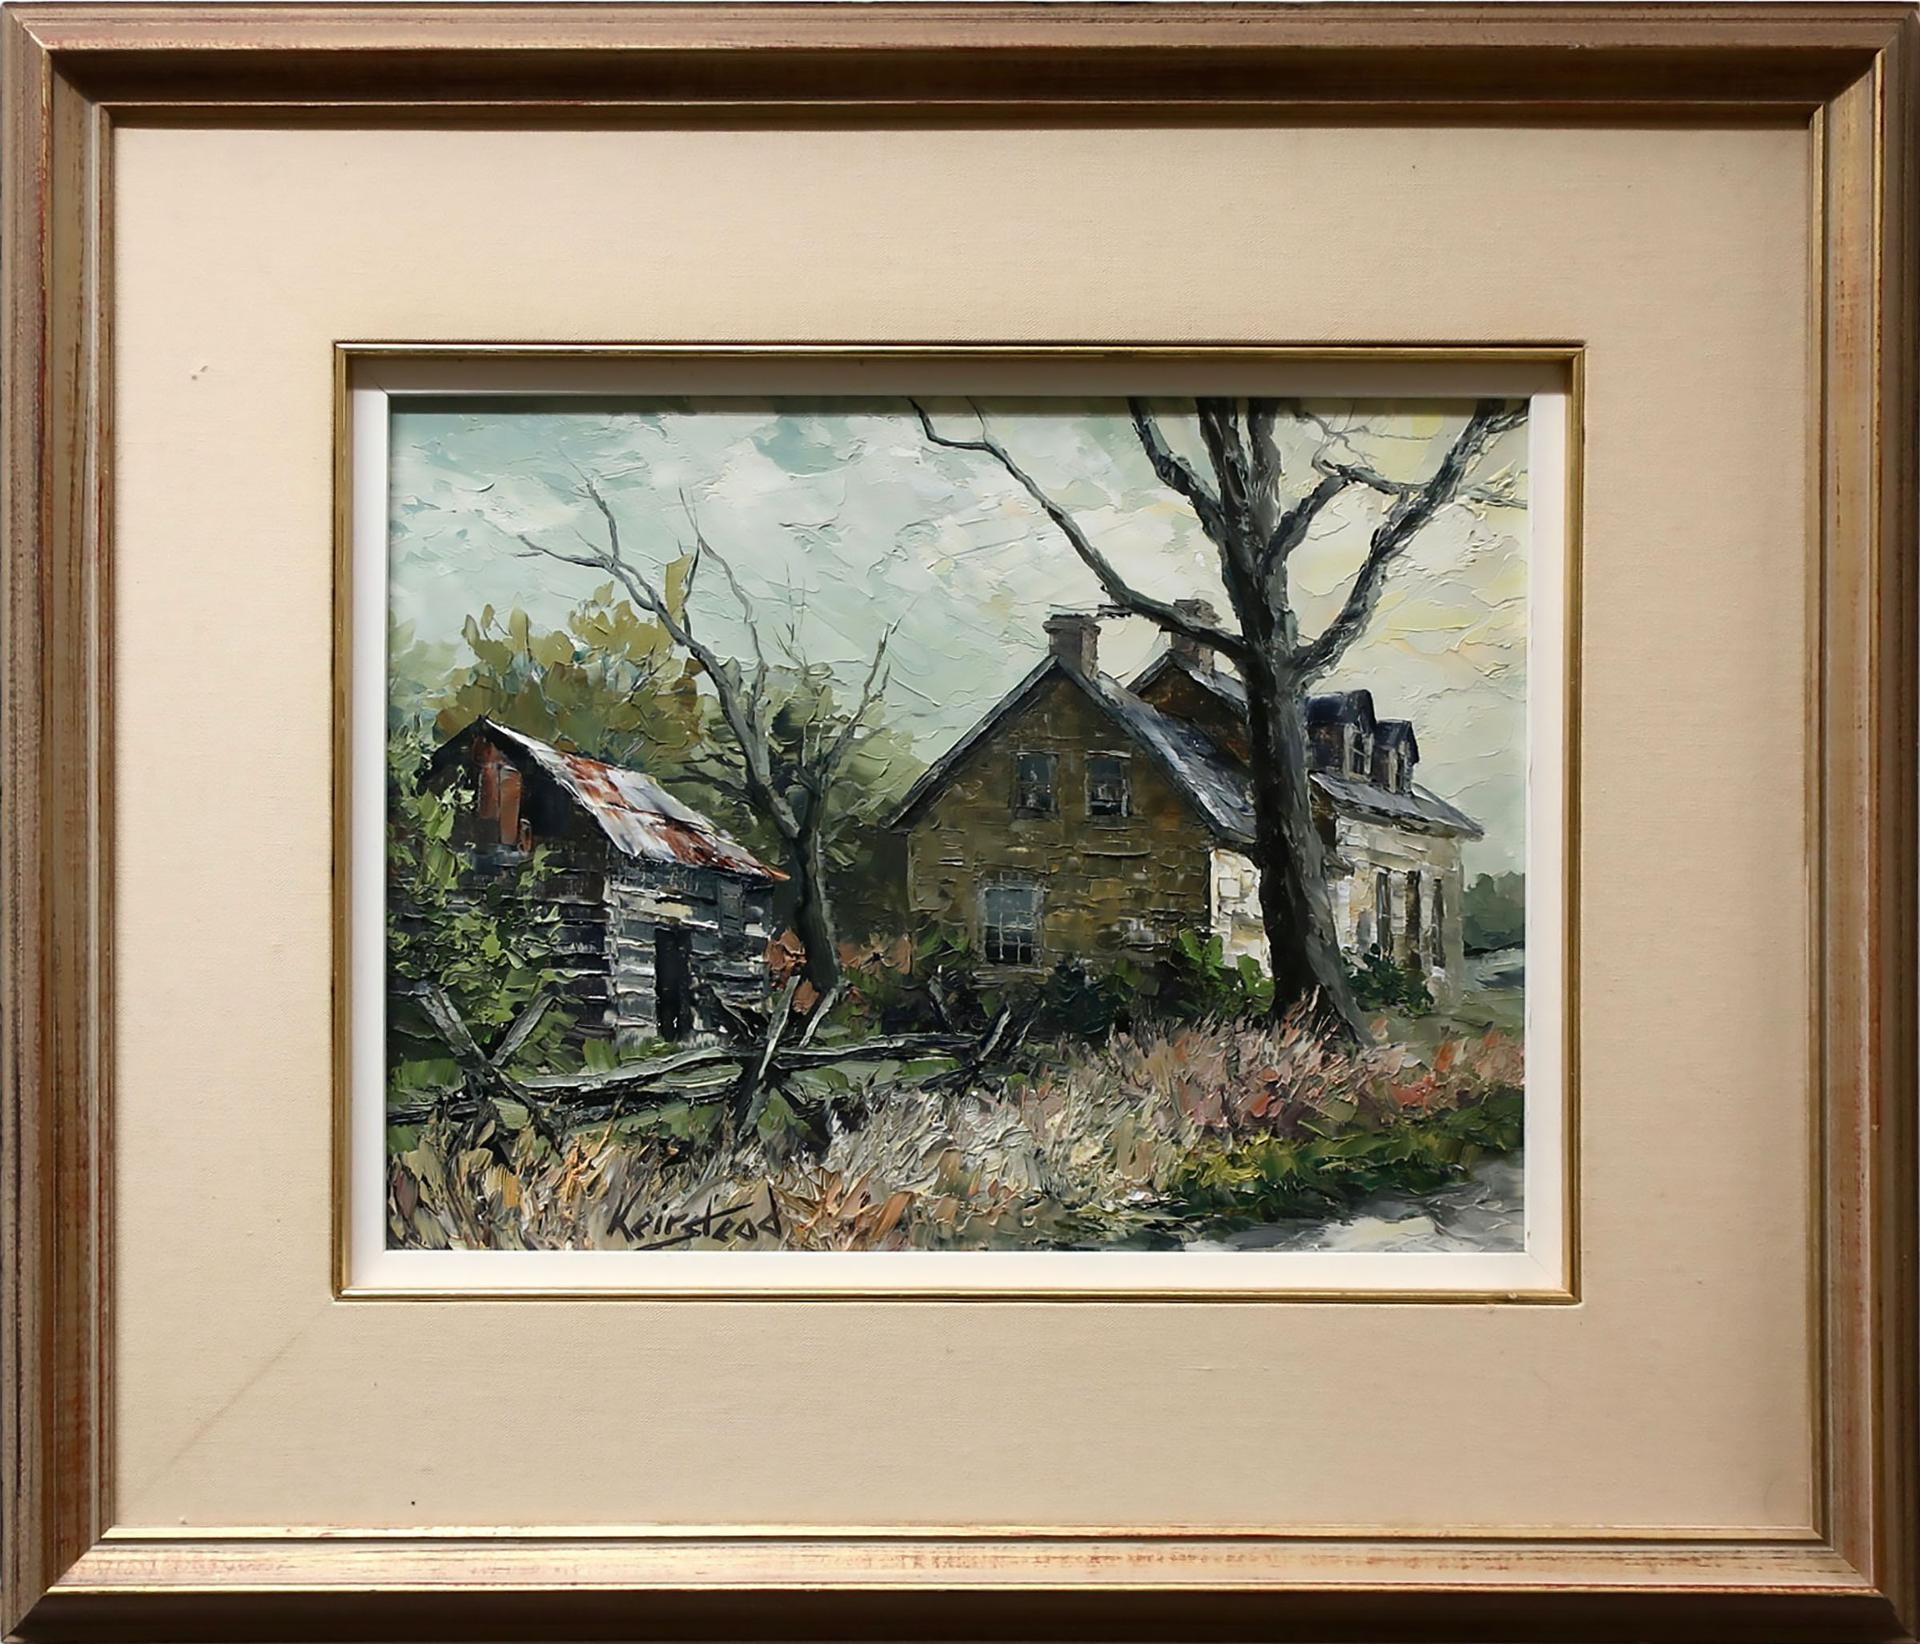 James Lorimer Keirstead (1932) - Untitled (Old House With Shed)